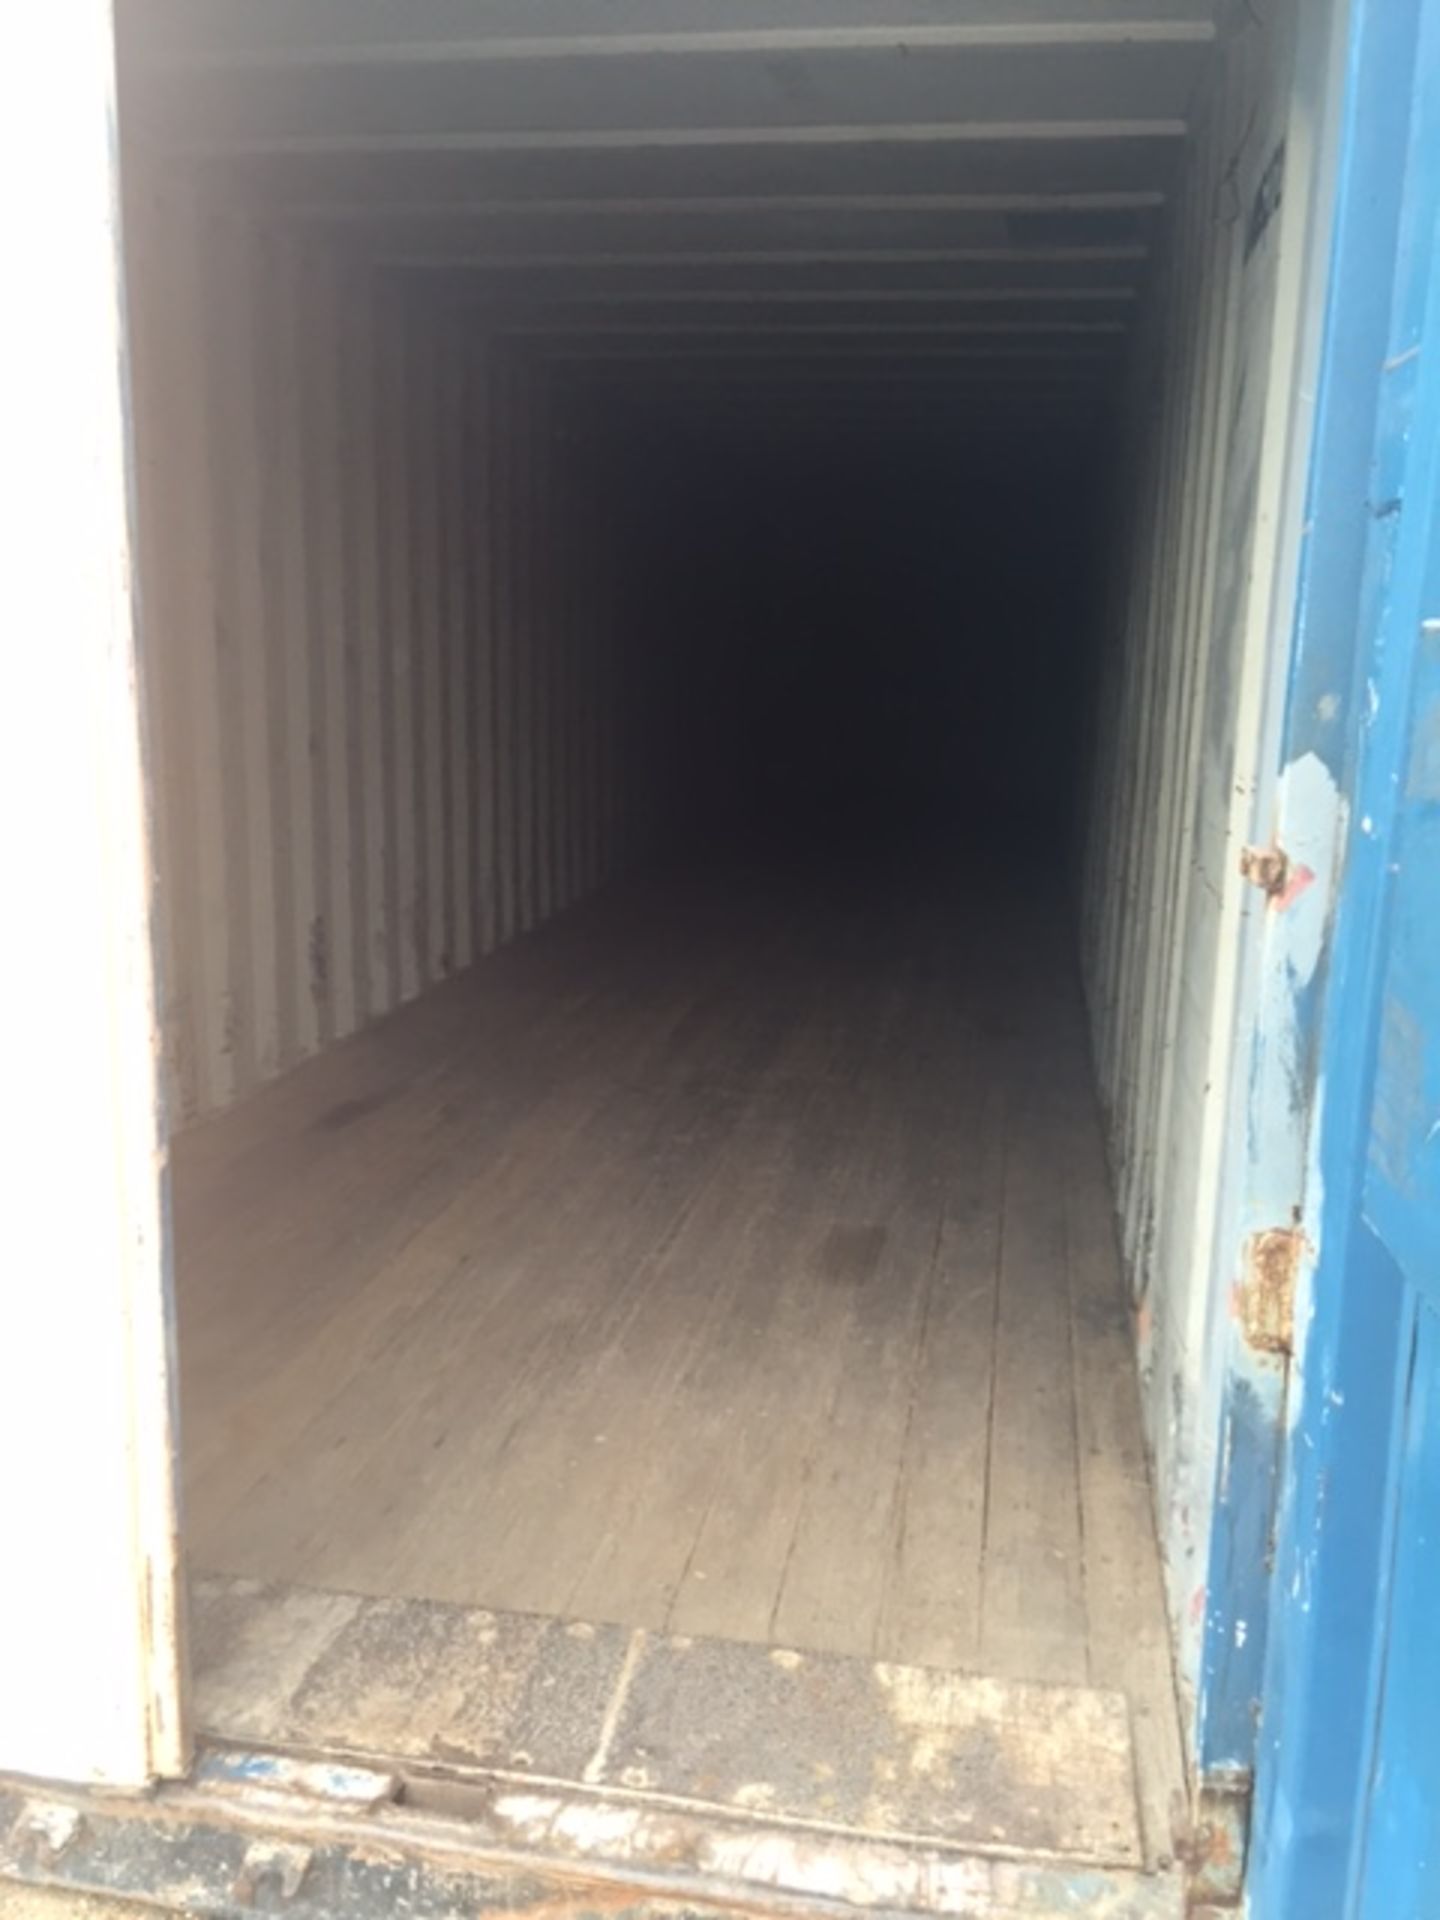 STEEL STORAGE CONTAINER, 40' X 90' X 8', Unit BSSL 405272 - Image 3 of 3